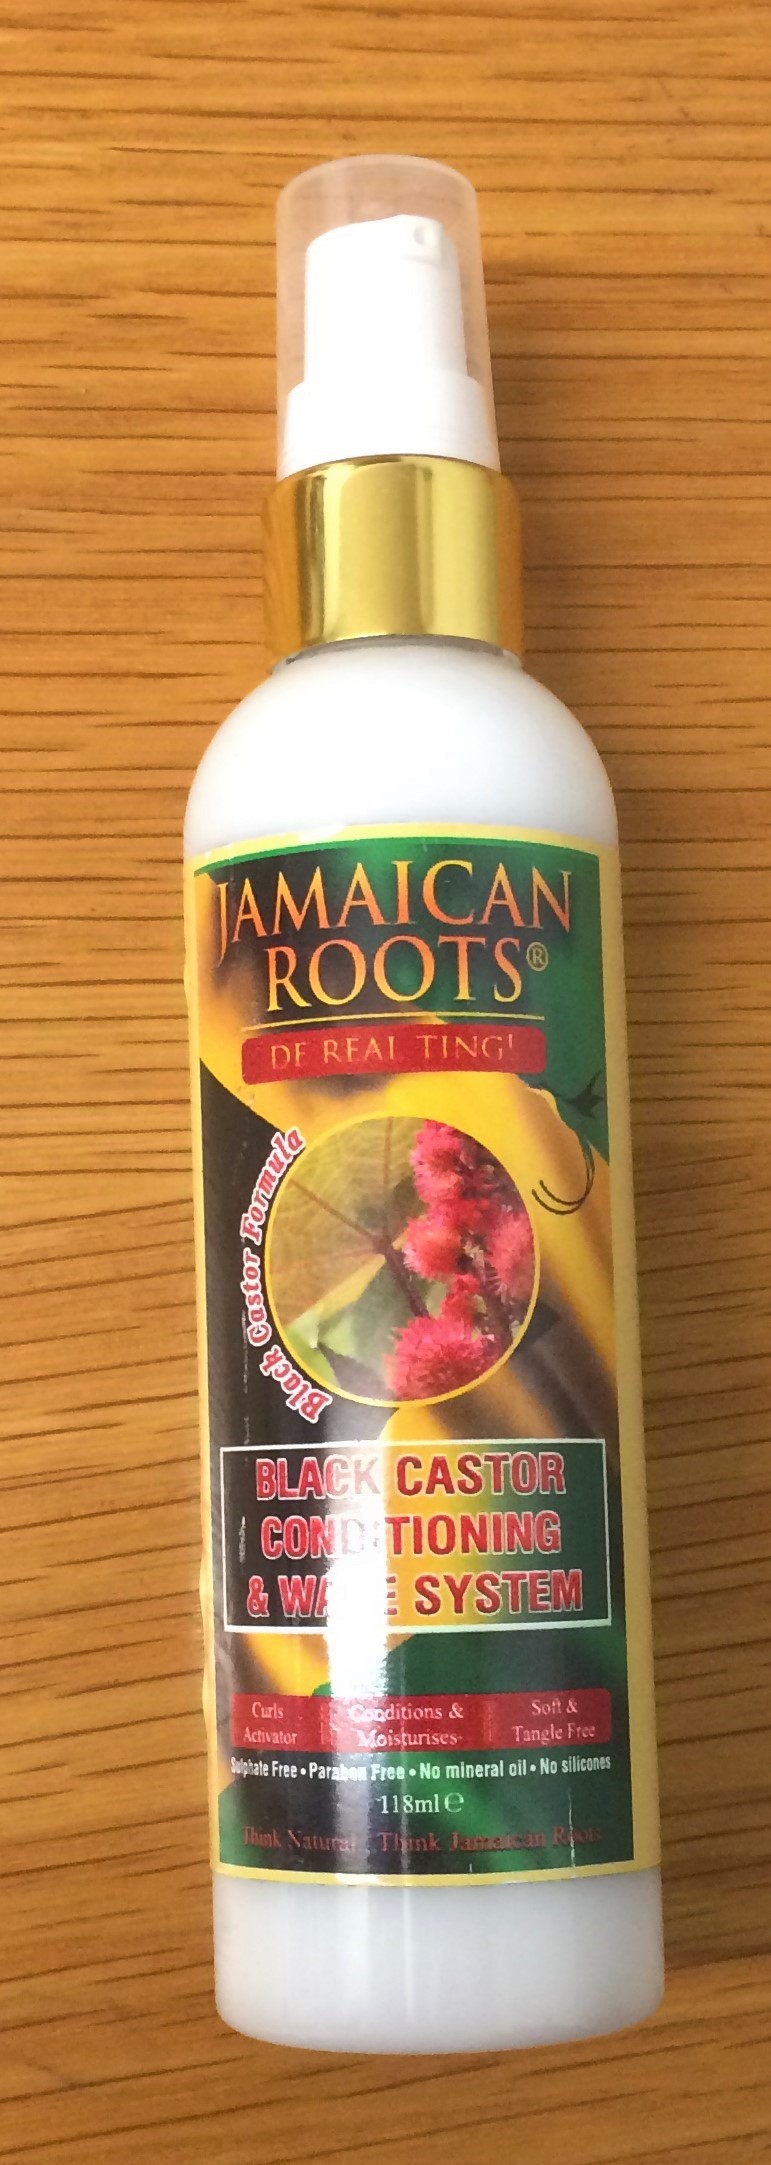 Jamaica Roots Black Castor Hair Conditioning & Wave System – Black Hair